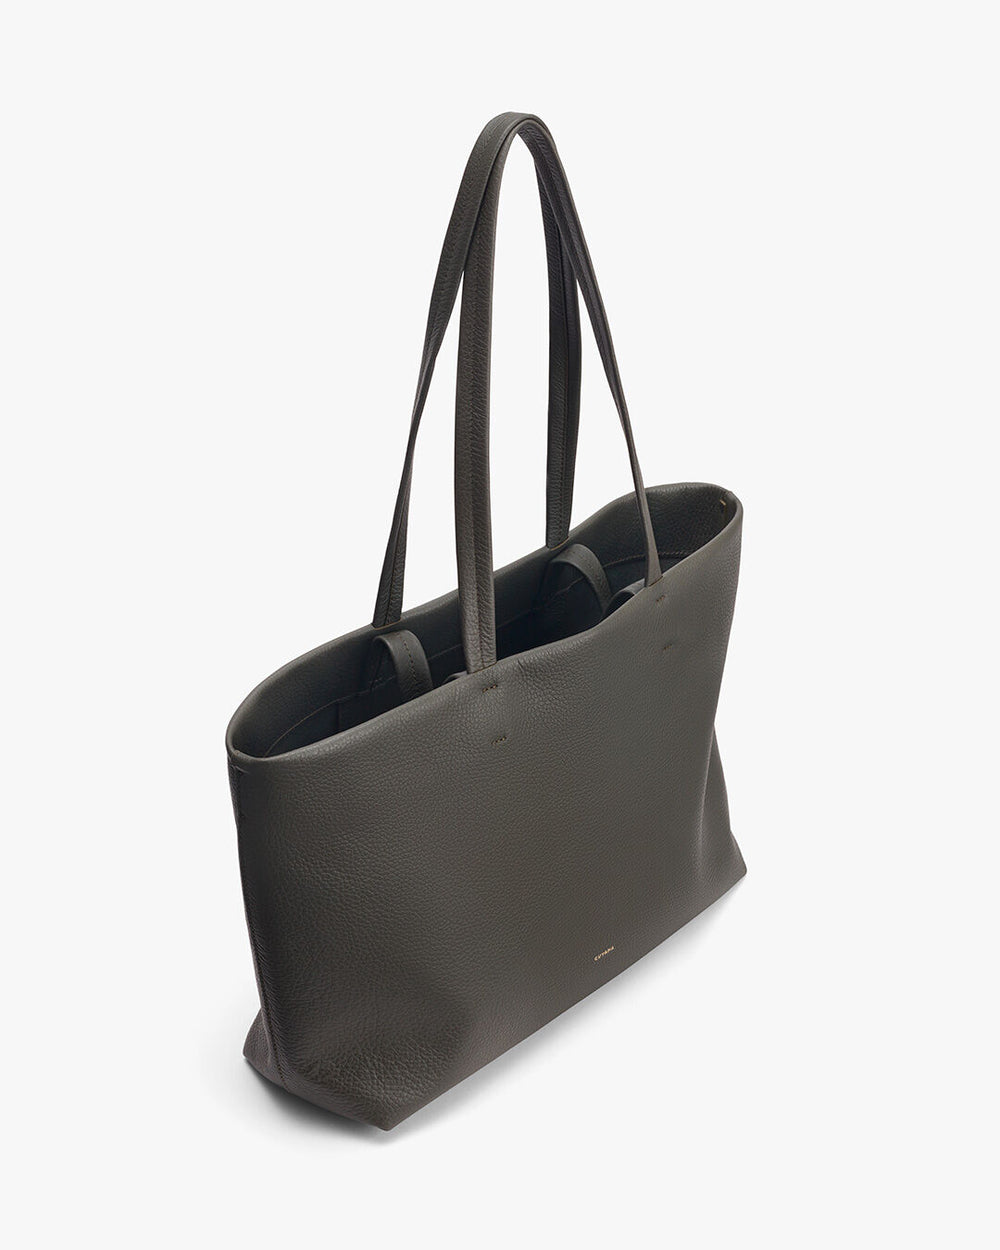 Leather tote bag with dual handles standing upright.